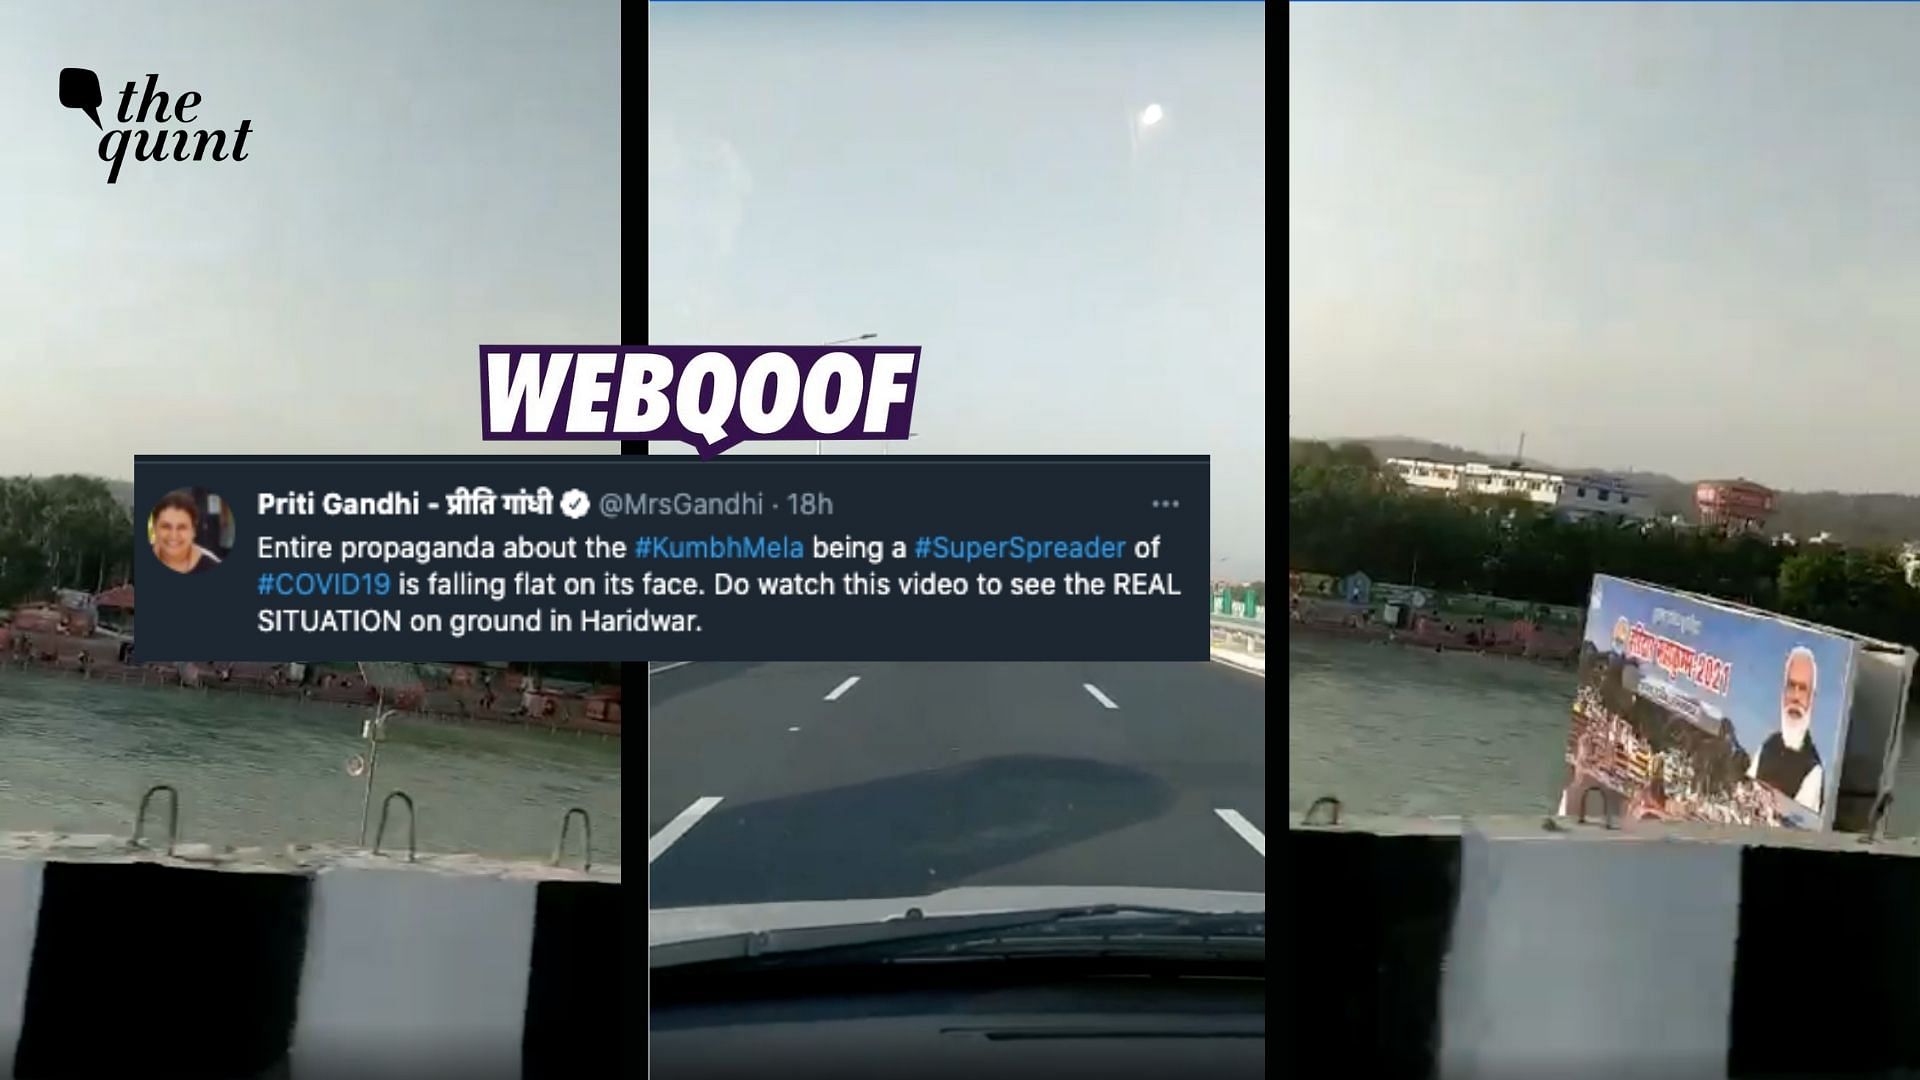 A video seemingly filmed on a flyover in Uttarakhand’s Haridwar is being shared on social media to claim that it busts the claim of the <a href="https://www.thequint.com/news/law/tablighi-jamaat-v-kumbh-mela-politics-of-selective-covid-policing">Kumbh Mela</a> being a “super spreader” of COVID-19.